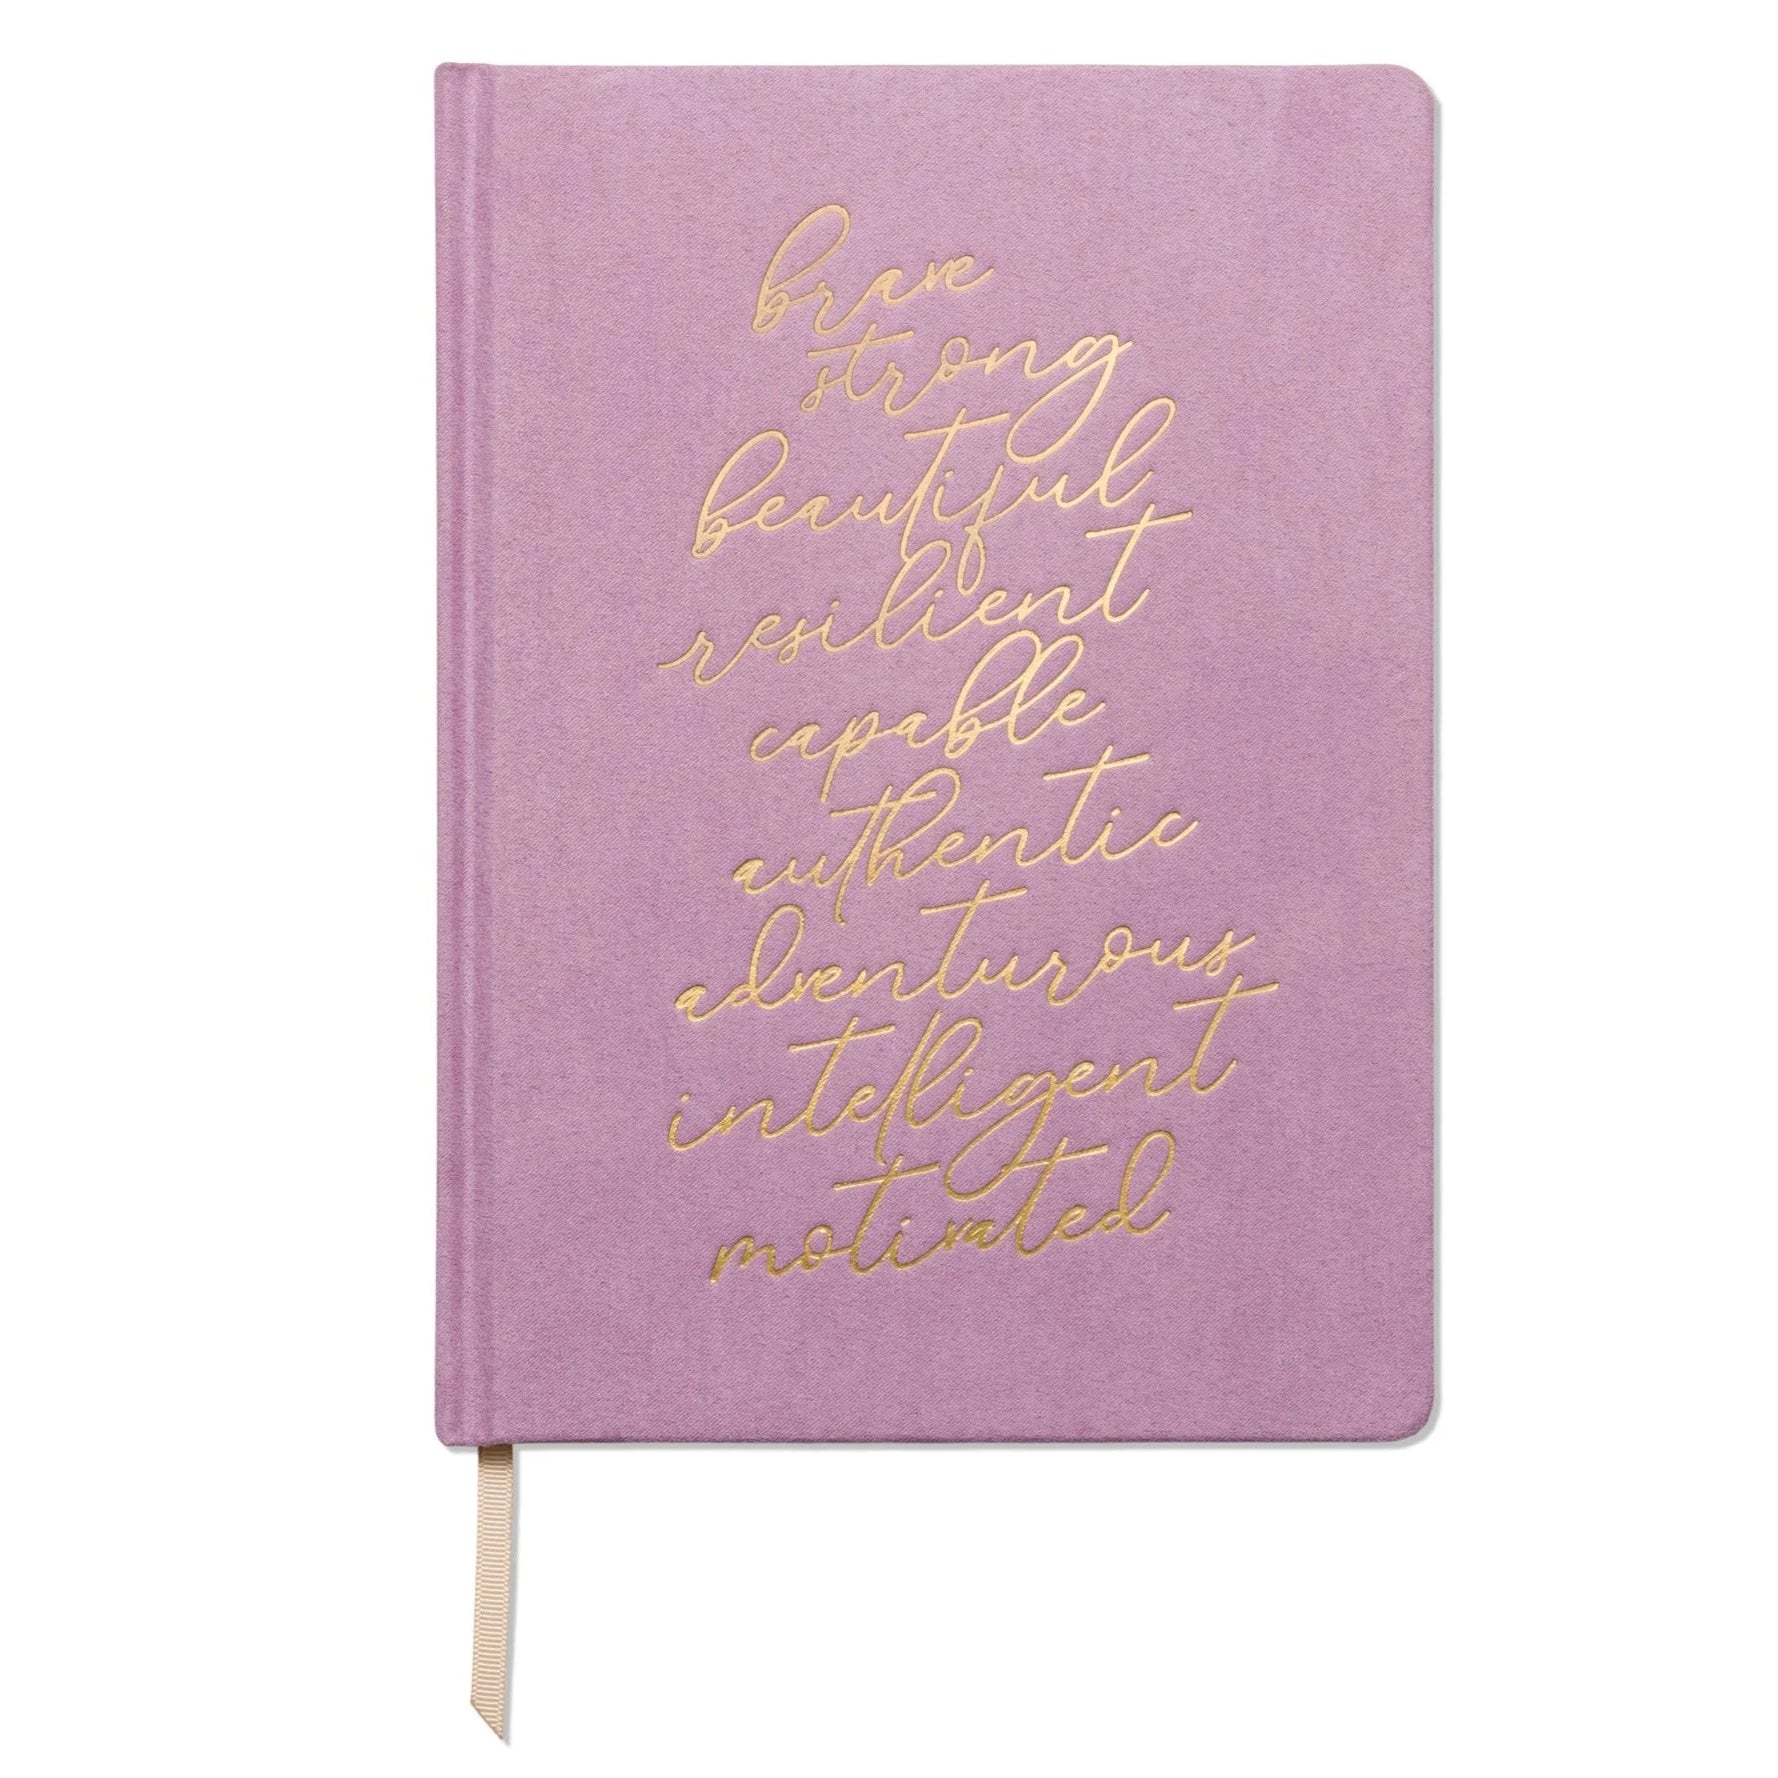 Affirmations Large Purple Notebook